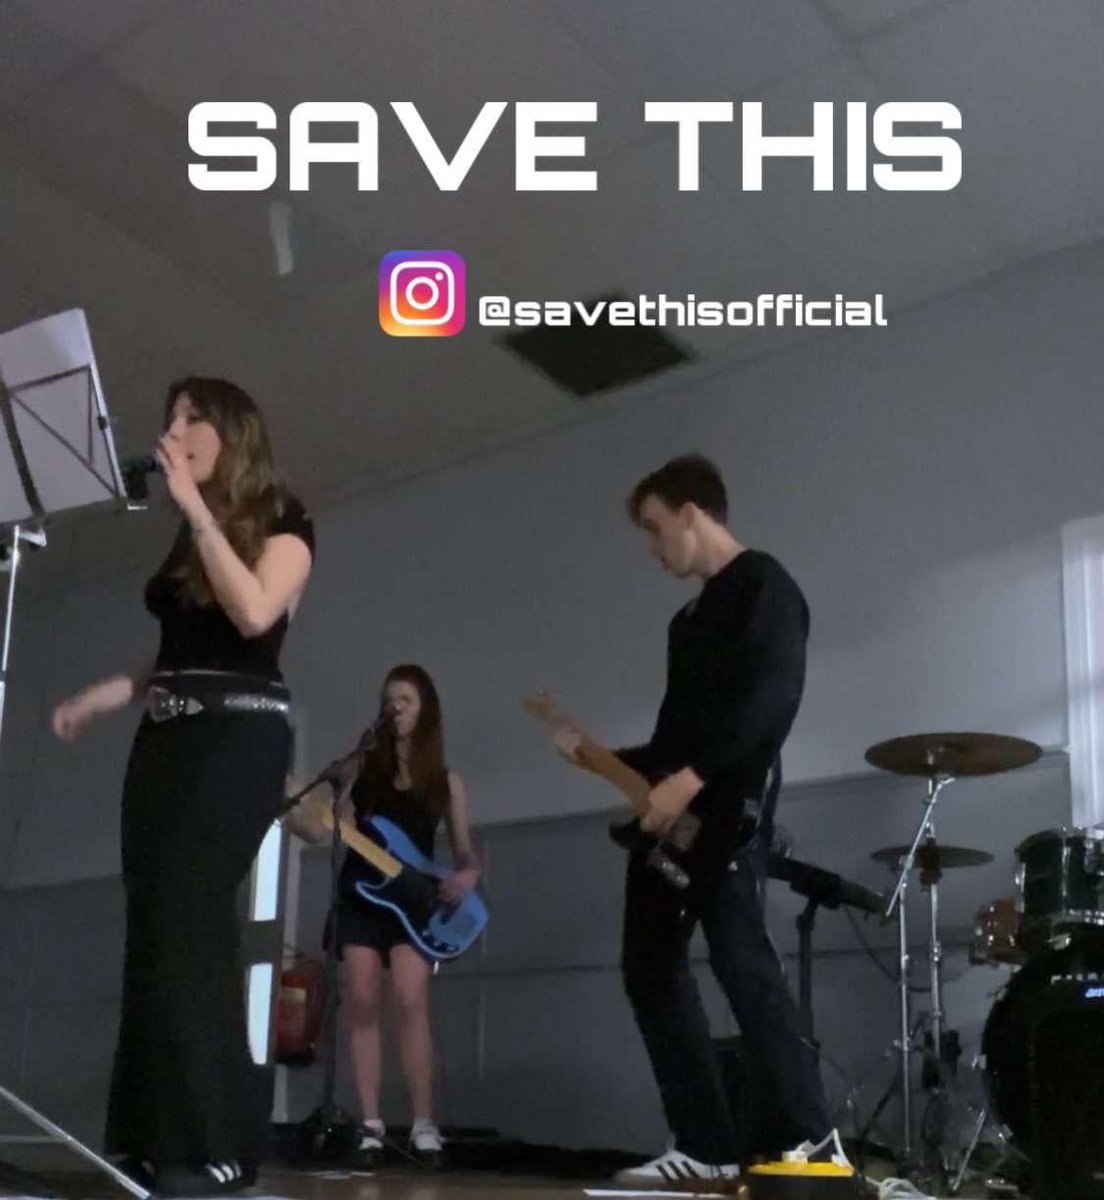 Don’t forget it’s Awards Night this Friday and as well as the awards themselves there will be music from the fantastic Save This! It all kicks off at 7:30pm in the clubhouse.